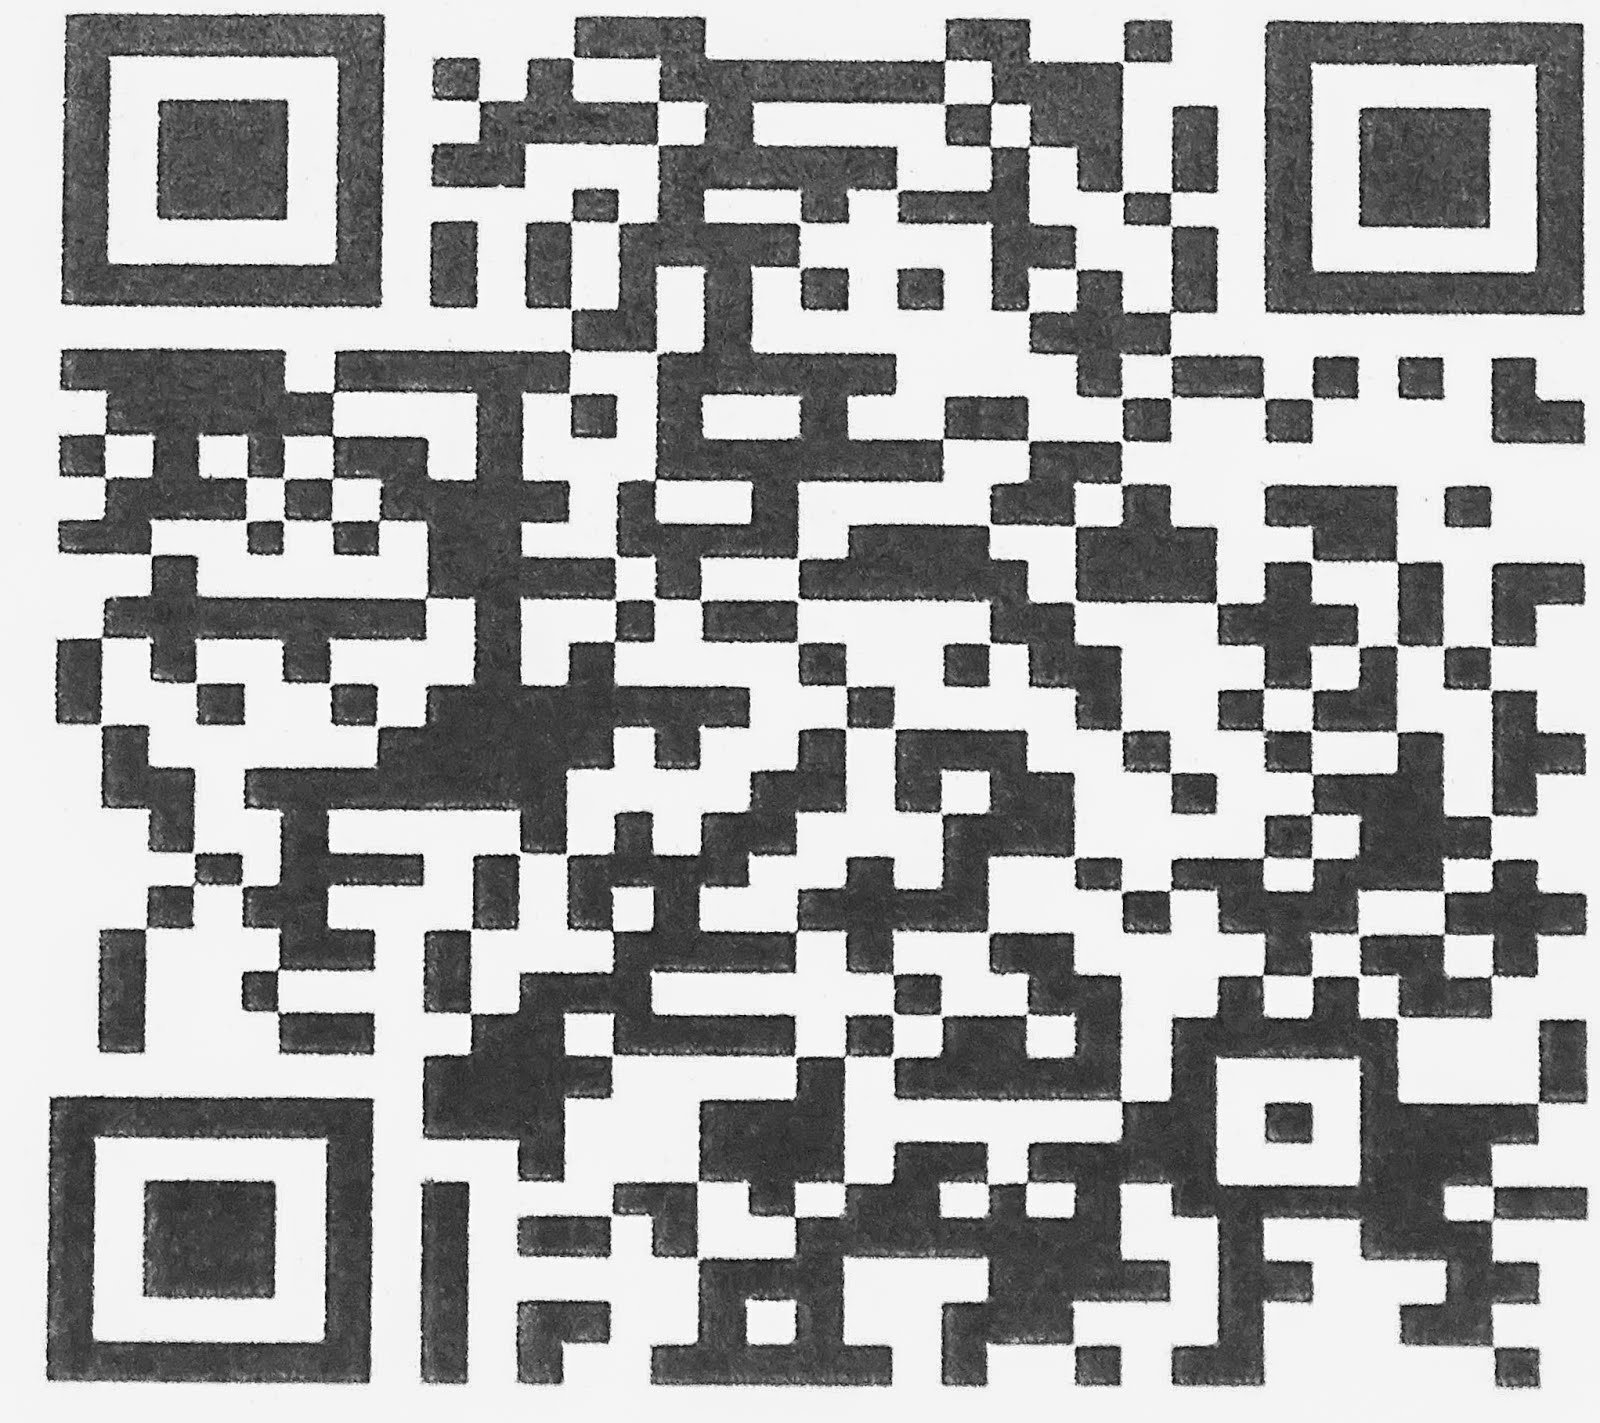 BYU Family History Library QR Code